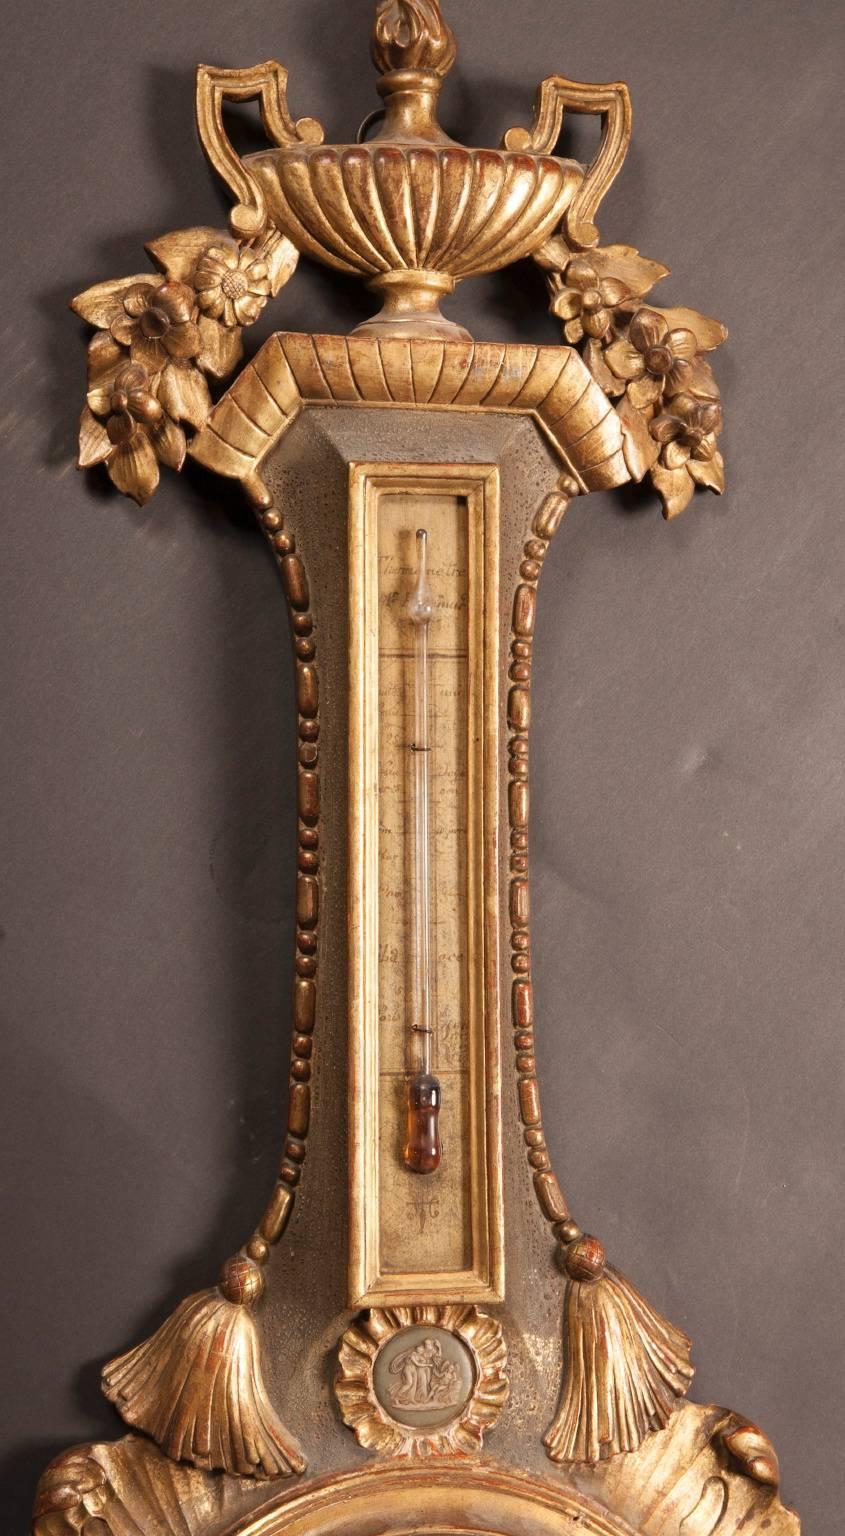 Made of hand-carved wood in 18th century France, this barometer is elegantly covered in a variety of carved designs, all coated in gold leaf. A handled Grecian vase sits atop the stem of the barometer, with a pair of carved tassels hanging down